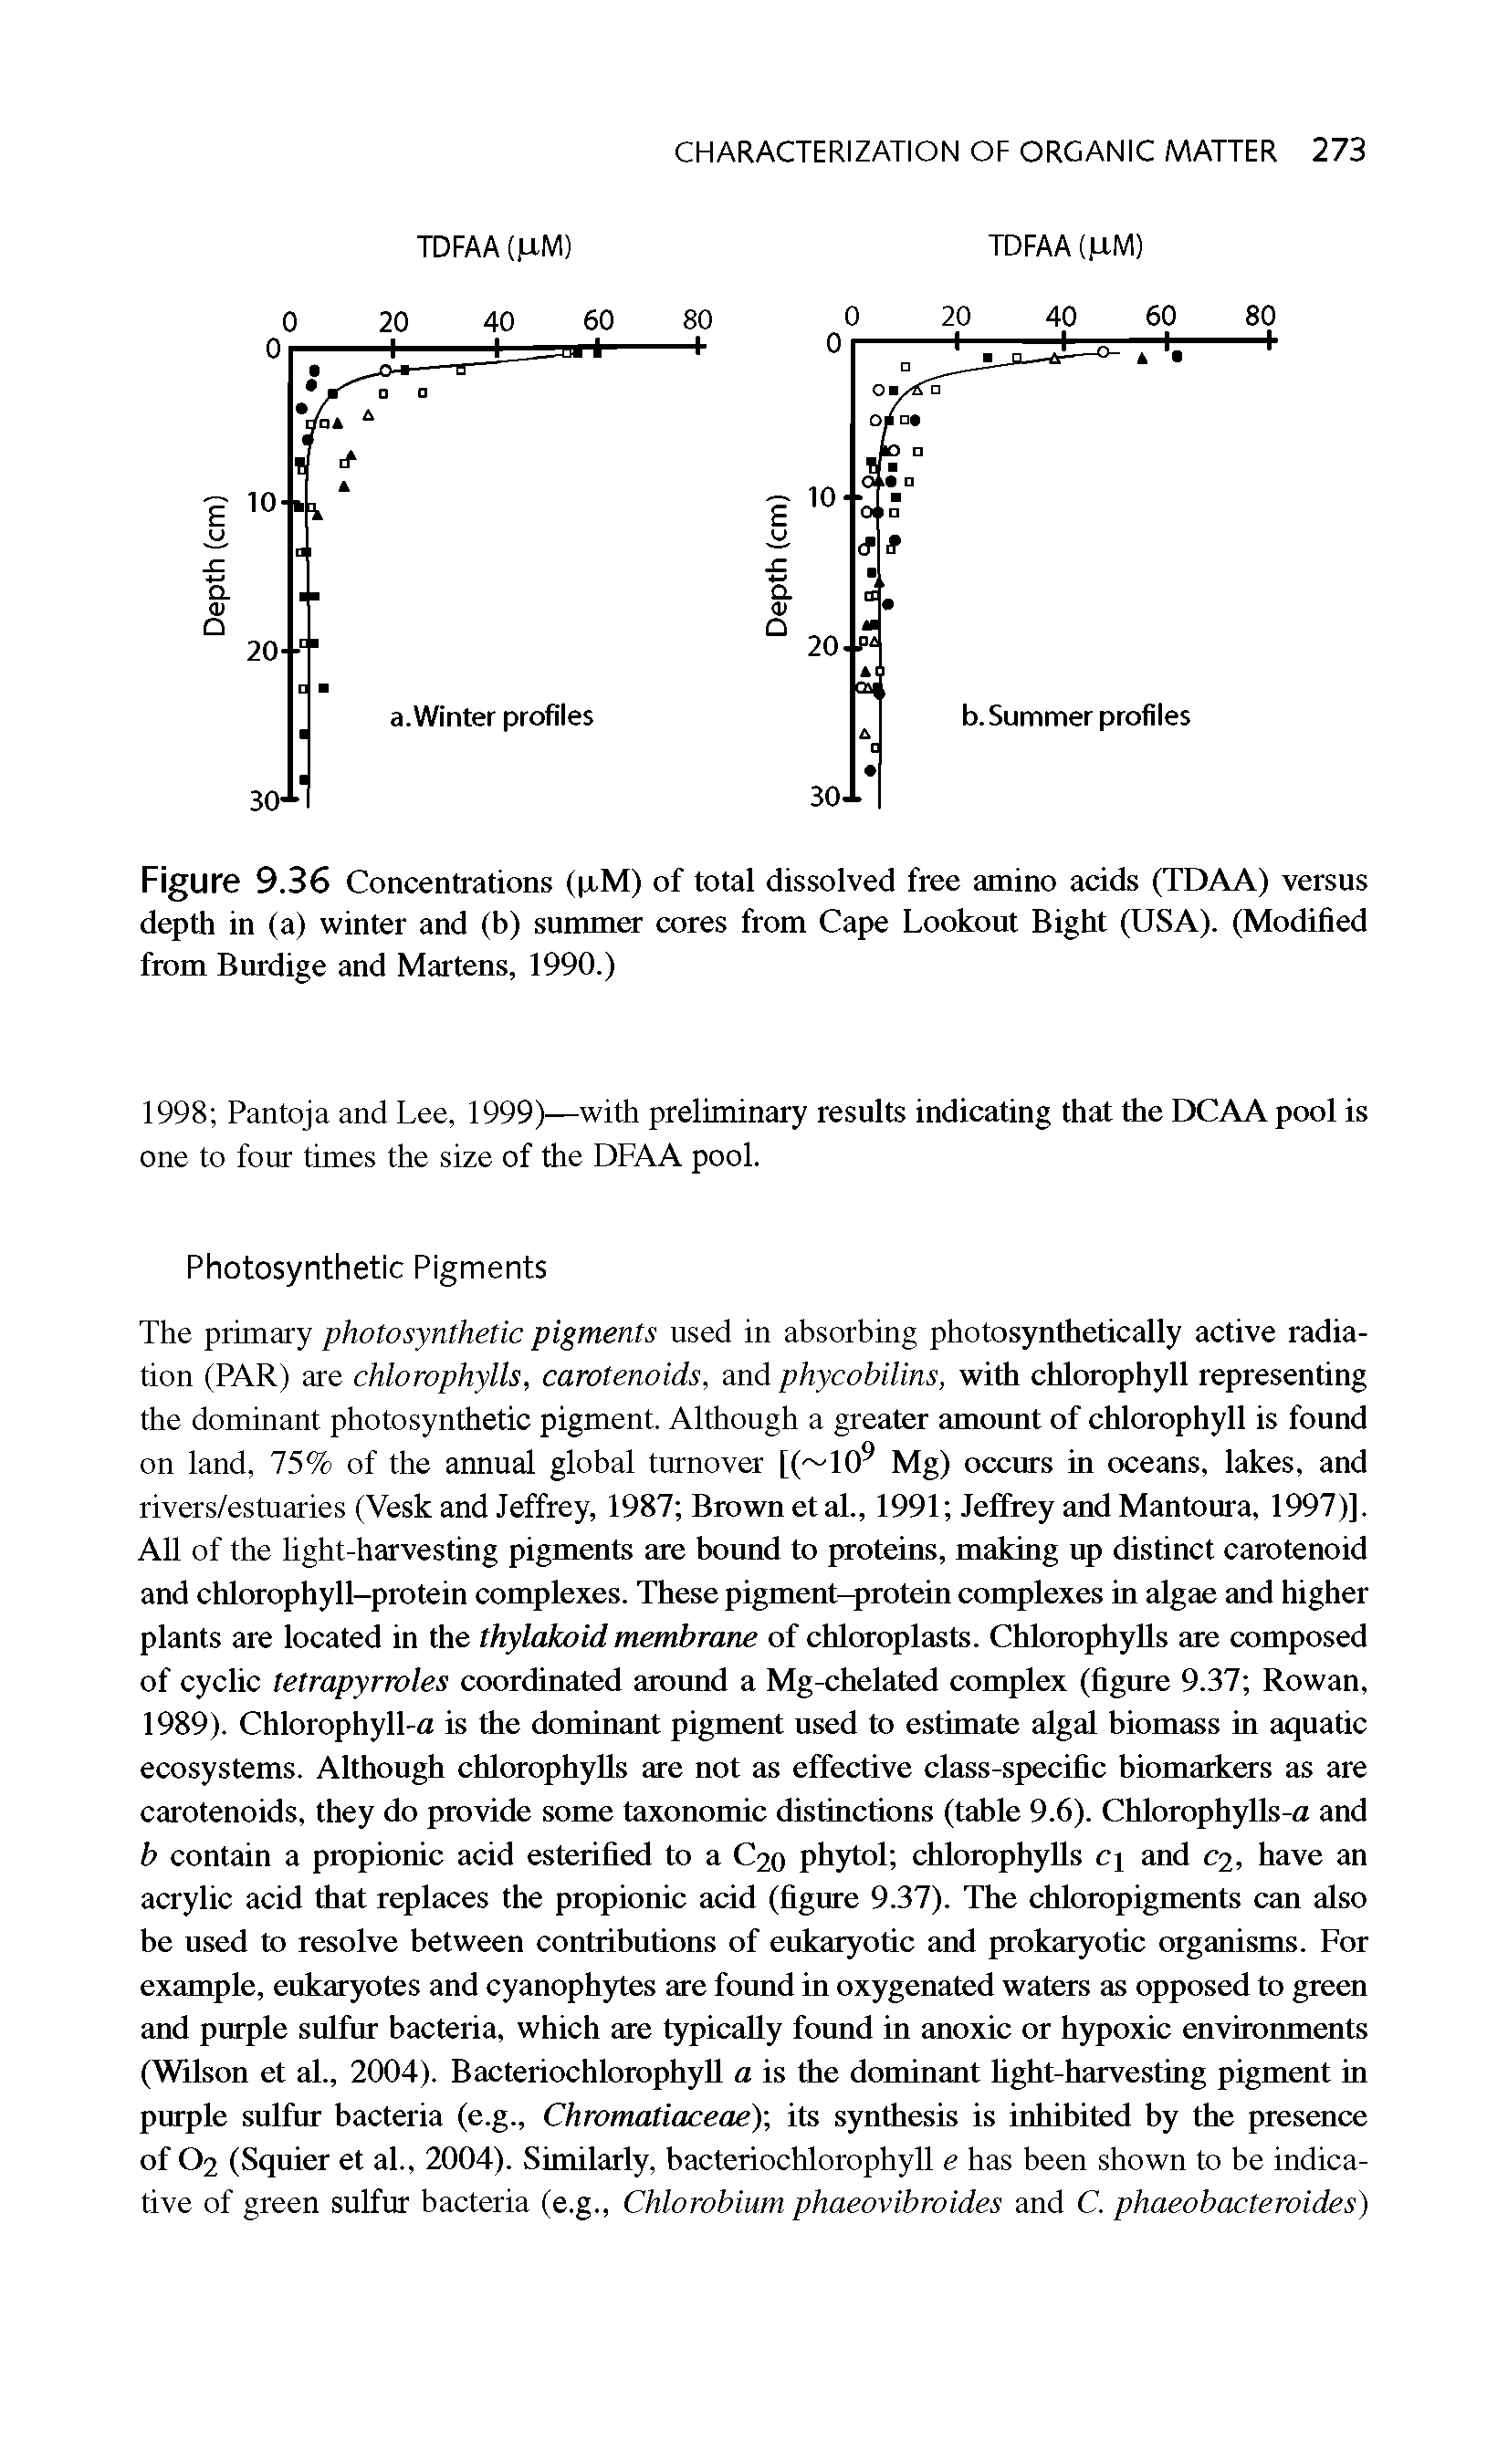 Figure 9.36 Concentrations ( iM) of total dissolved free amino acids (TDAA) versus depth in (a) winter and (b) summer cores from Cape Lookout Bight (USA). (Modified from Burdige and Martens, 1990.)...